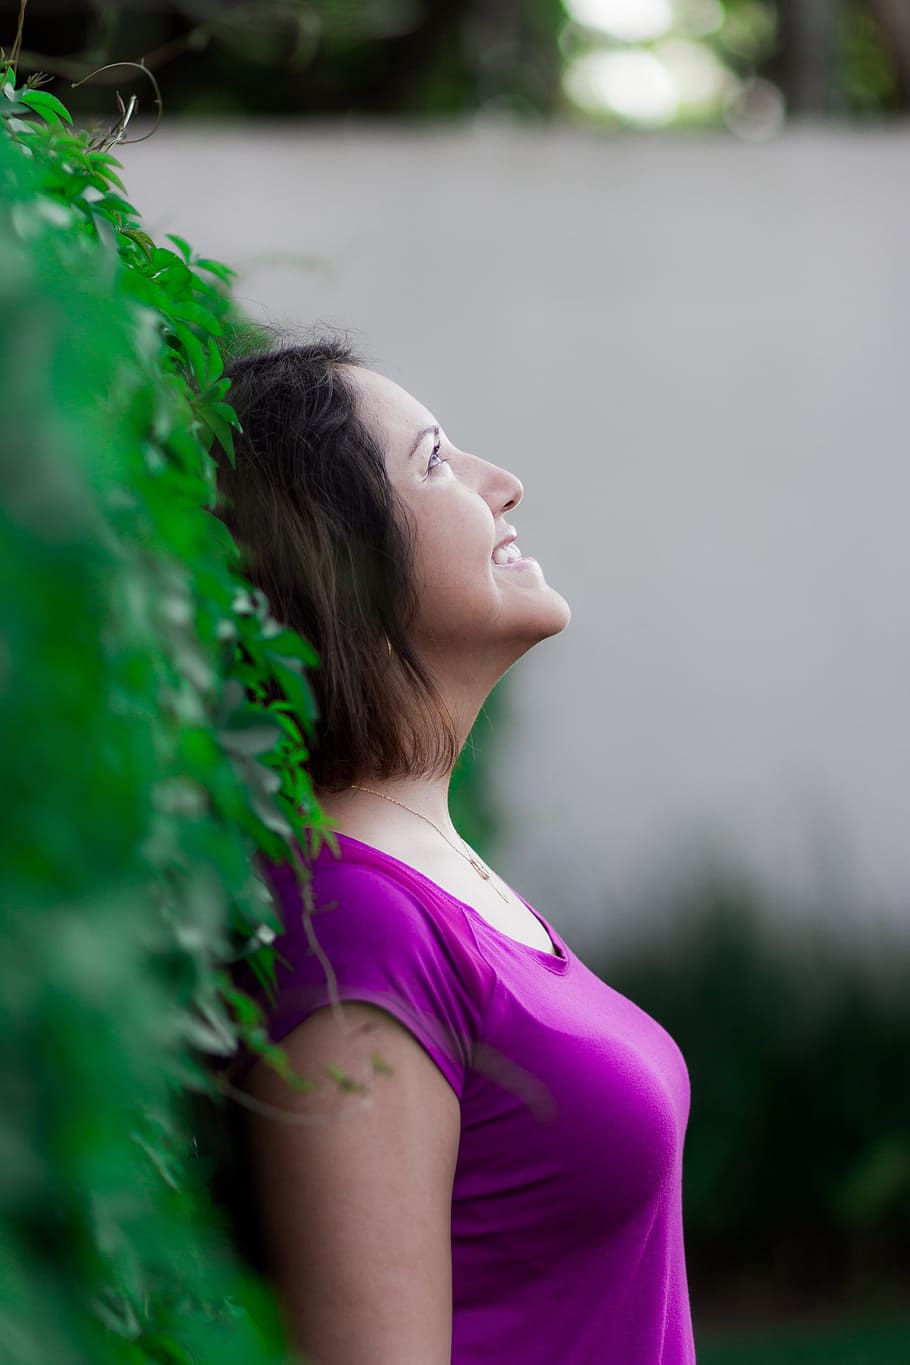 Woman, Contemplate, Peace, green fence, contemplation, meditation, calm, relaxation, women, outdoors